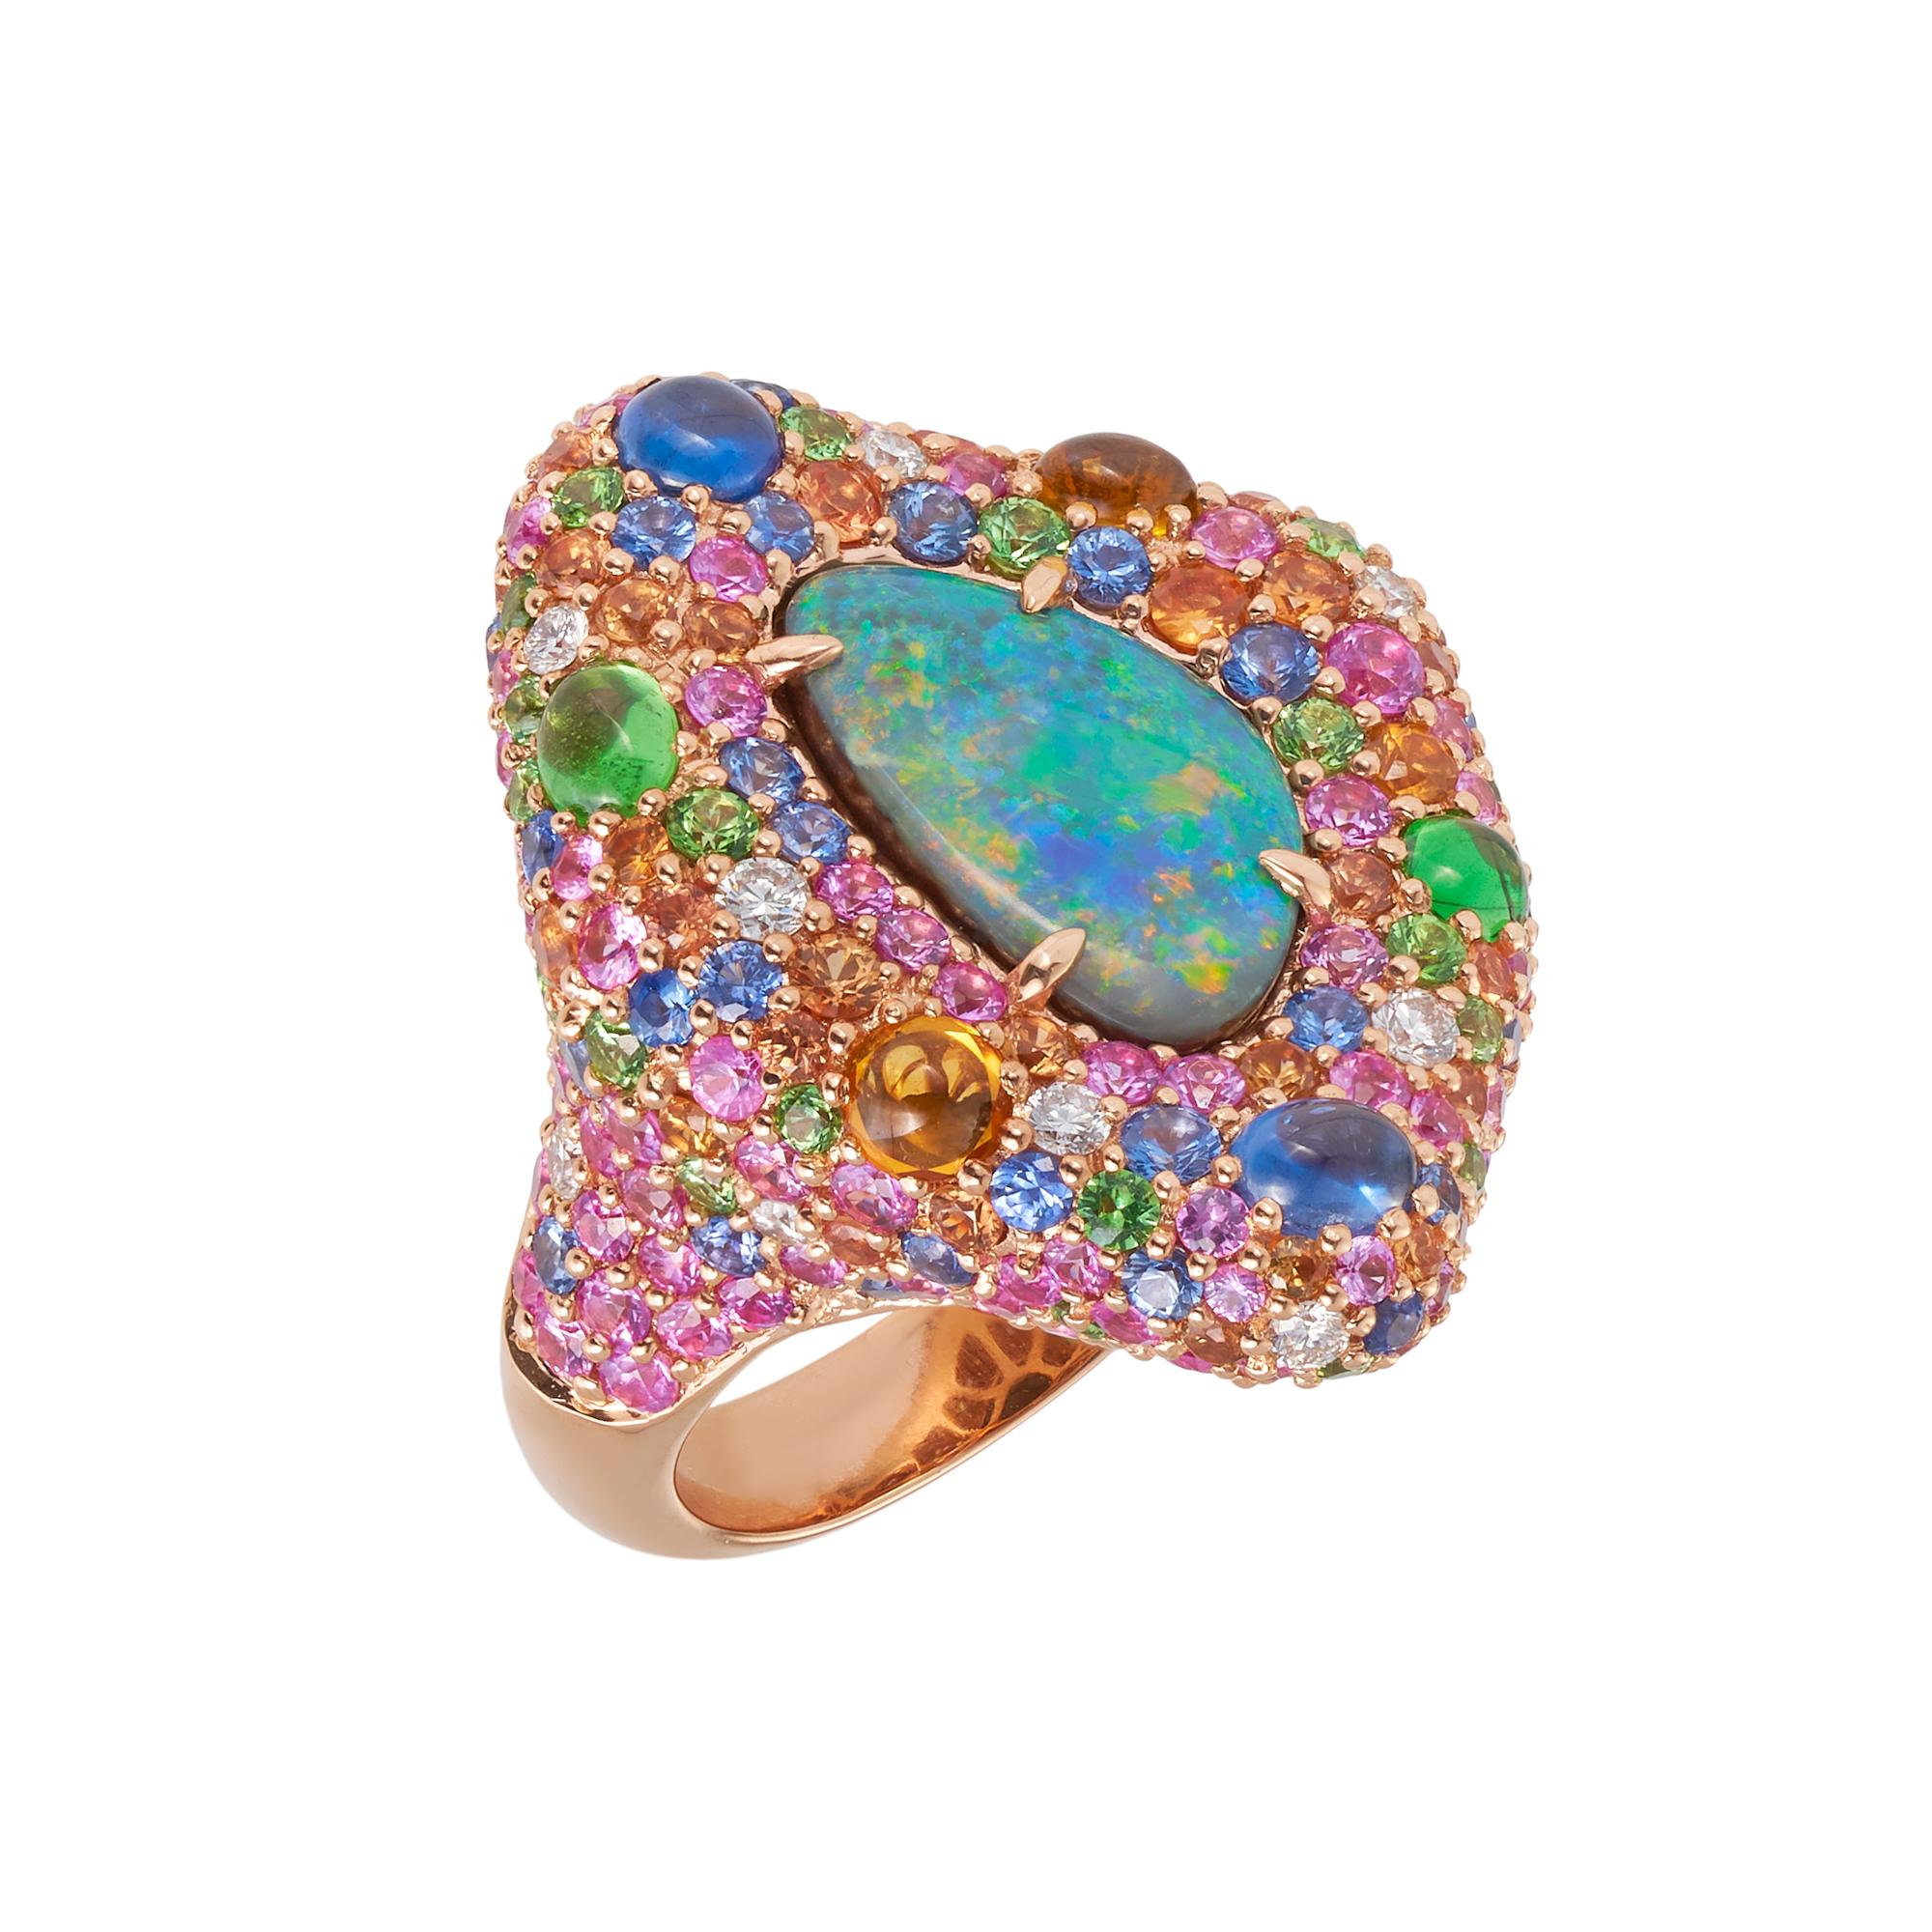 18 karat Rose Gold Opal Ring, featuring a 4.04cts Solid Natural Queensland Boulder Opal surrounded by diamonds 0.31ct, sapphires 1.76cts, pink sapphires 2.65cts, orange sapphires 1.48cts and tsavorites 1.05cts.